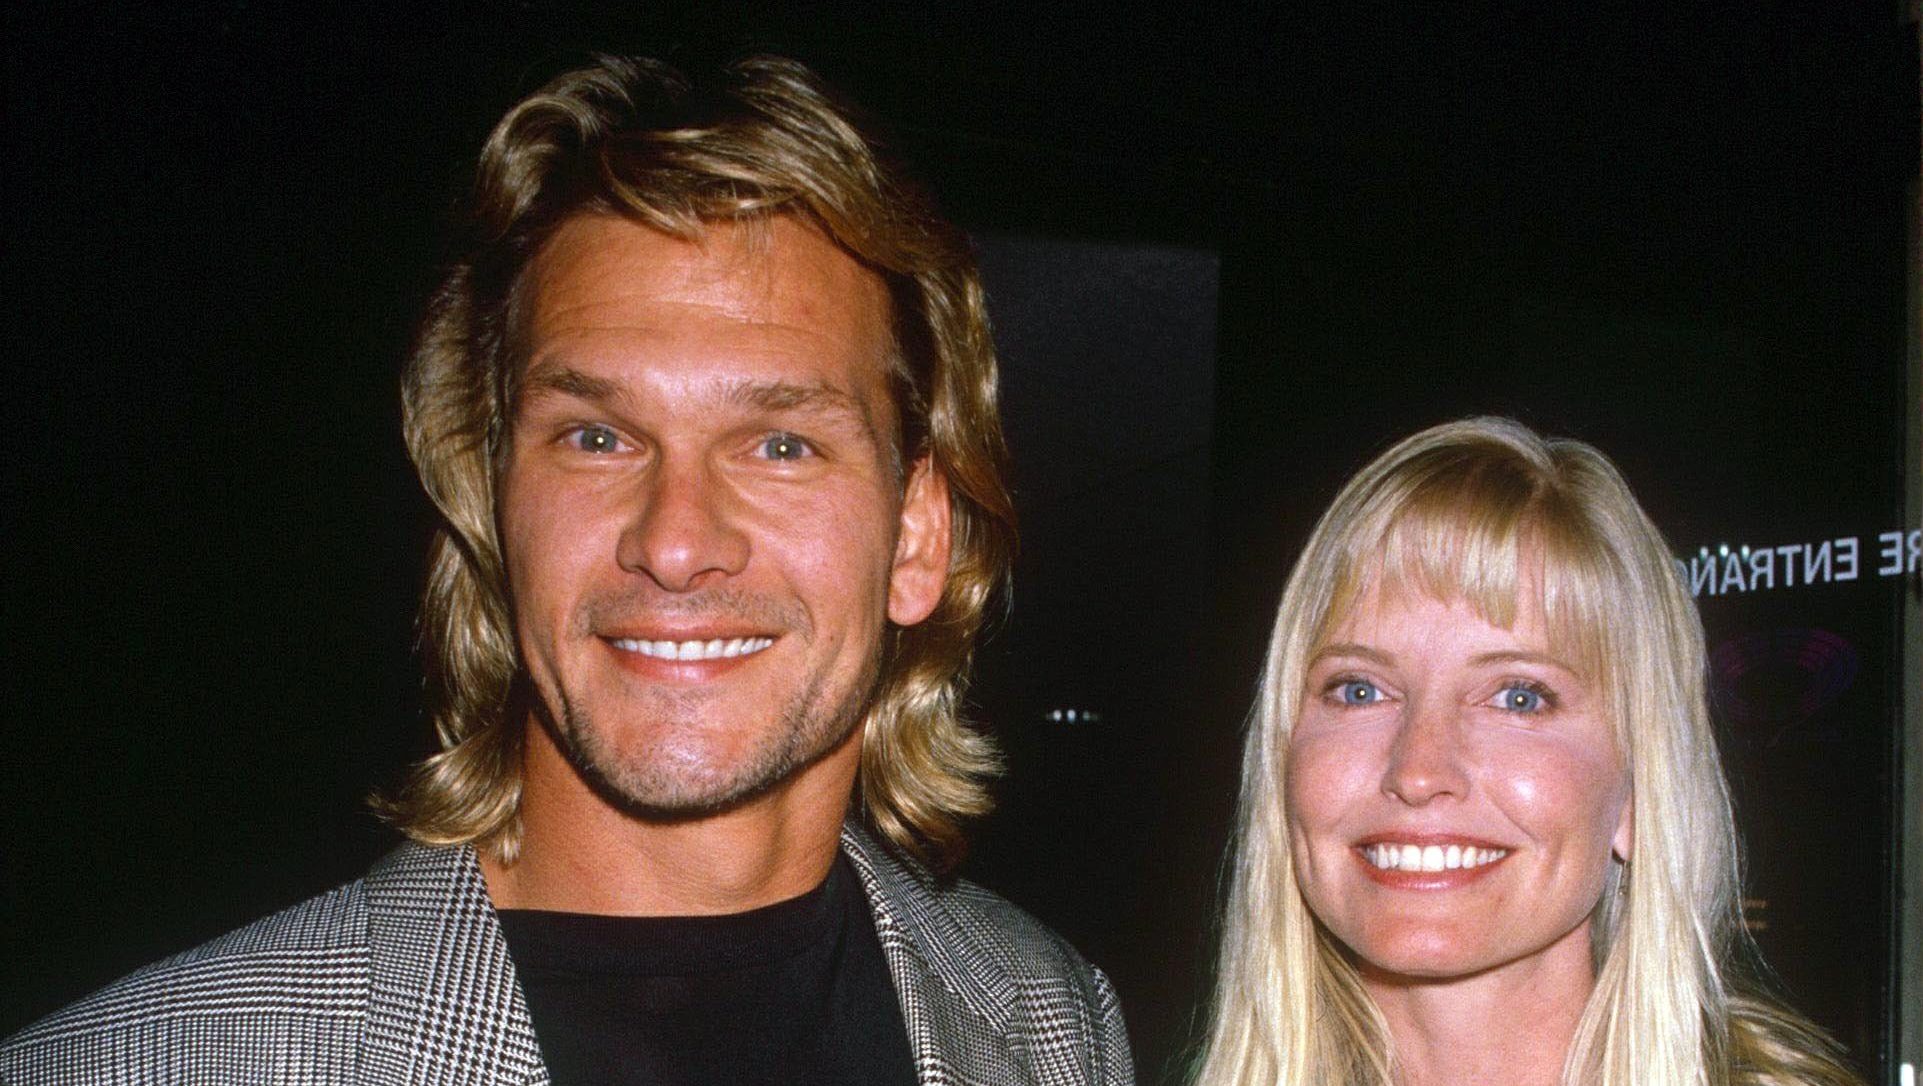 Patrick Swayze Wife Lisa Niemi Details on the Actor's Longtime Love